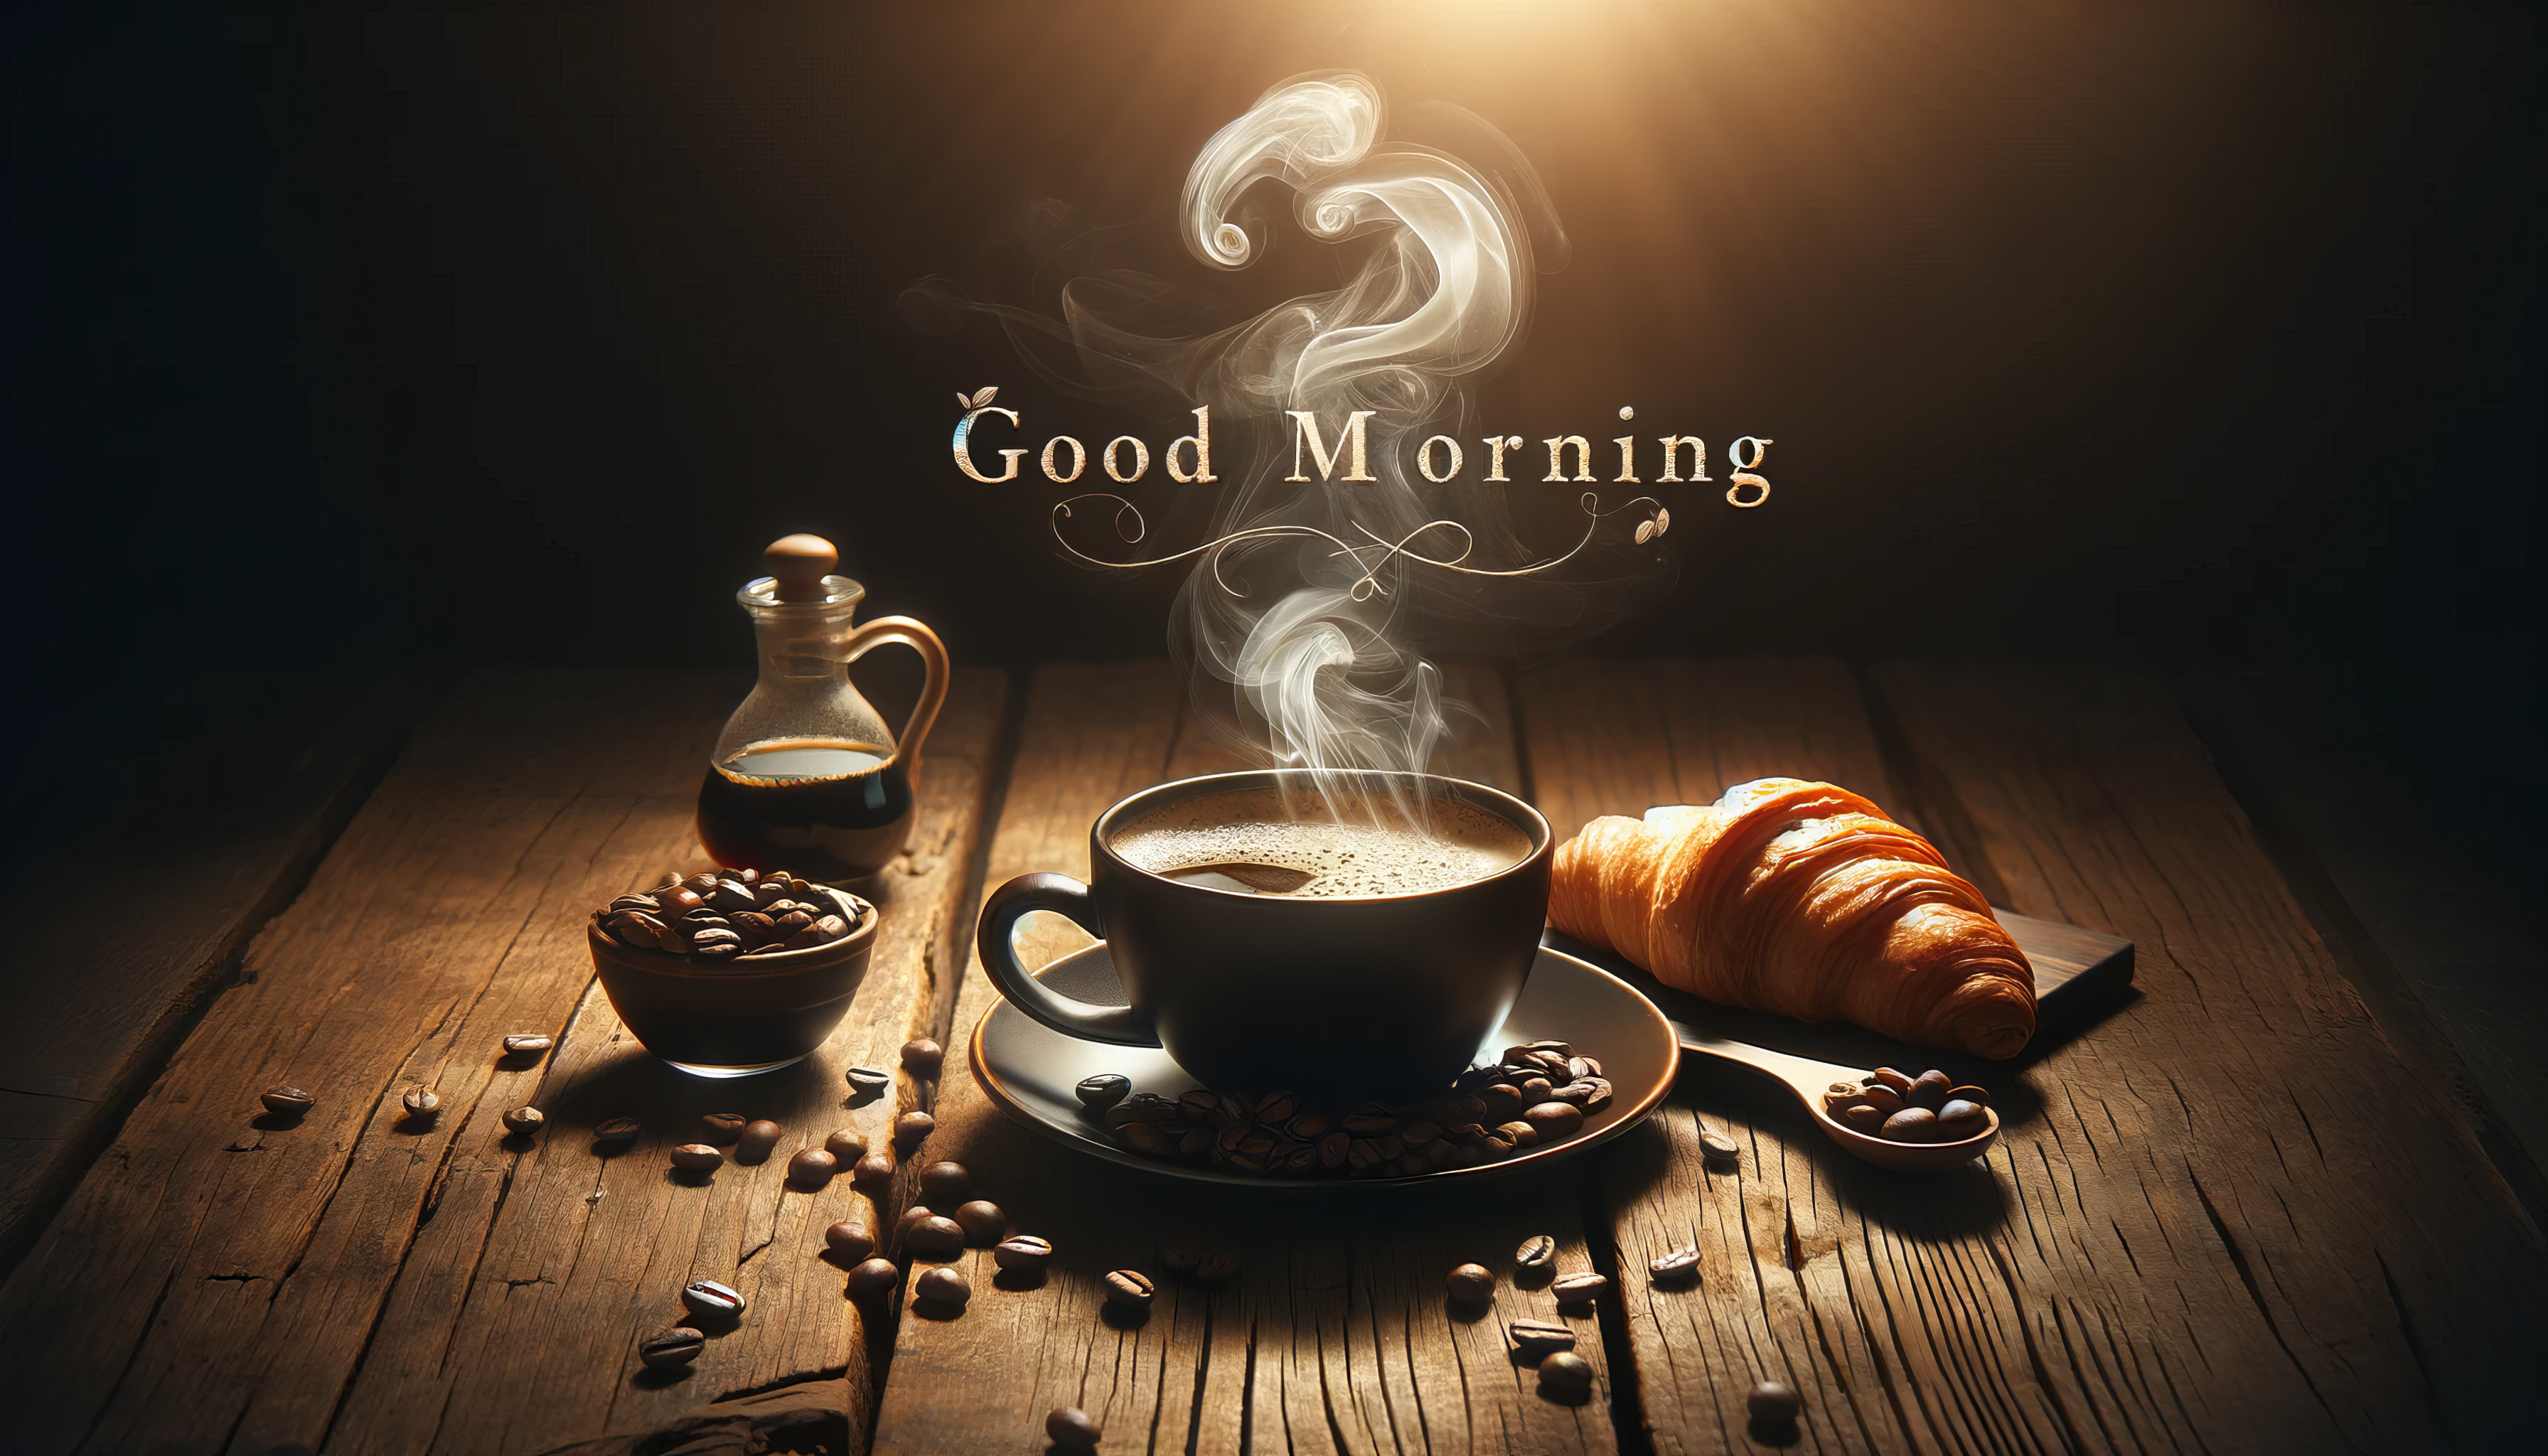 Warm and inviting good morning desktop wallpaper featuring a steaming cup of coffee, coffee beans, a croissant, and a coffee pot on a wooden surface with a soft glowing light and 'Good Morning' text.